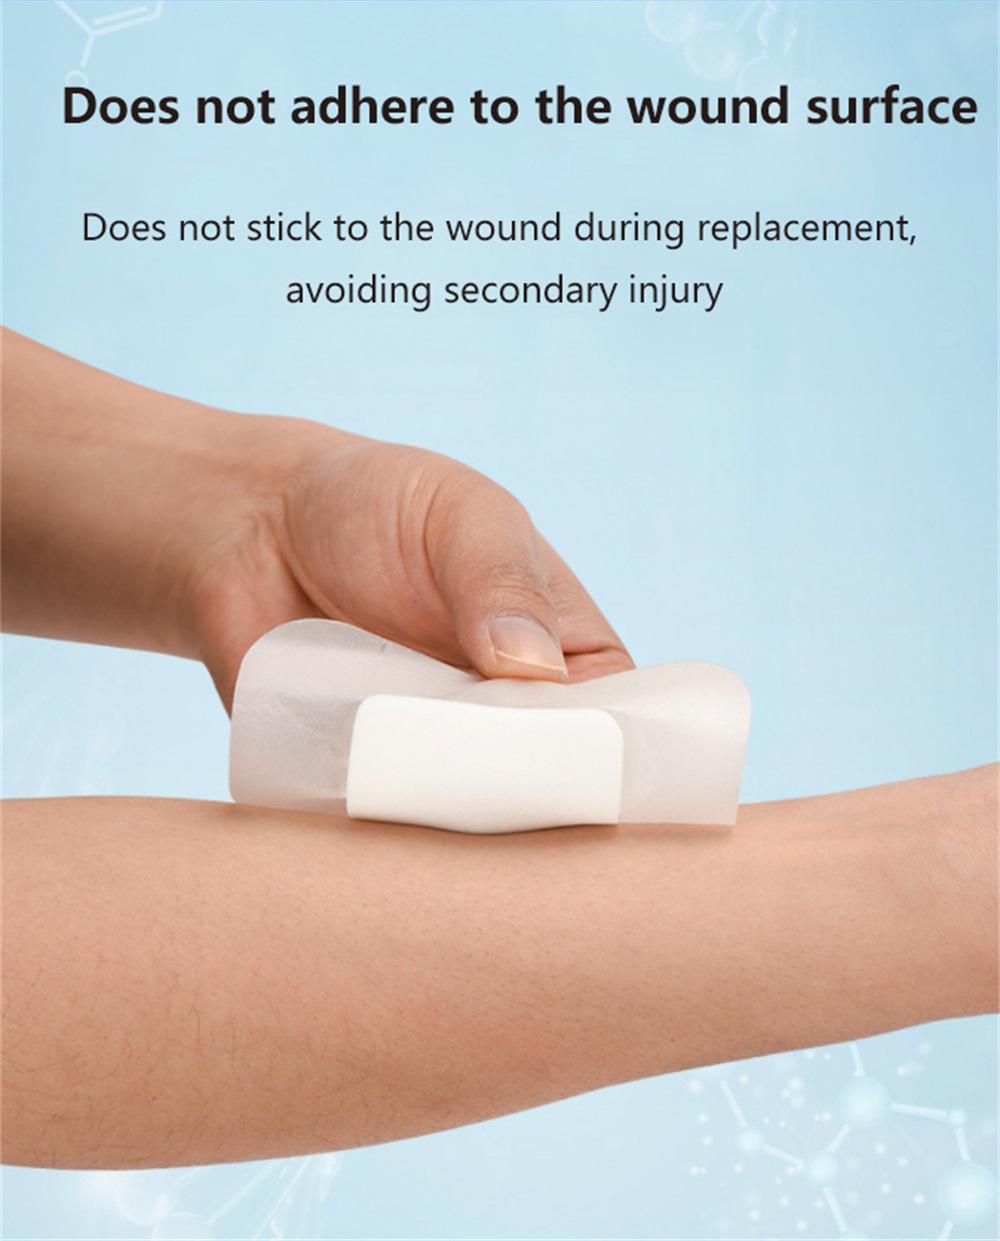 Adhesive Dressing for Burn Wounds Advanced Wound Dressing Absorbent Extra Thin Hydrocolloid Dressing Wound Care